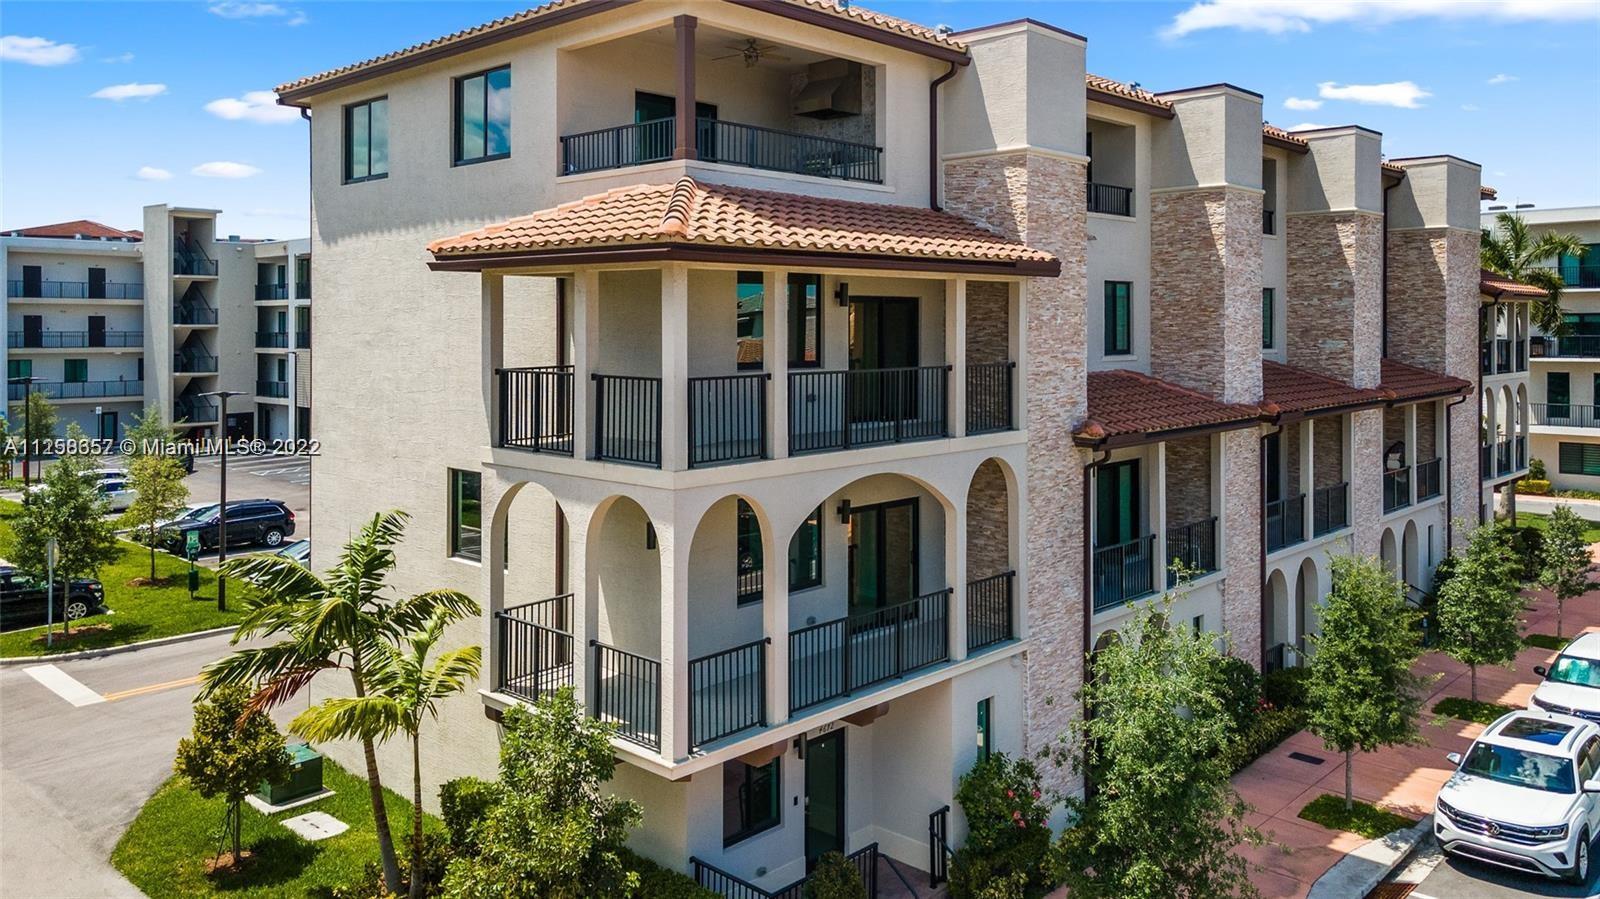 For Sale, this stunning corner 4 story Townhome at URBANA Downtown Doral, near schools, parks, restaurants and shops. This unit features a media room, skyview terrace BBQ area, private elevator, 2- car garage, and much more. The units have new tiling flooring, floor to ceiling European kitchen cabinets, European back splash tiles in kitchen, upgrade GE profile appliances, full laundry with modern upgraded Samsung washer and dryer, laundry sink with stone top. Smart apps to manage A/C, doorbell, range, washer and dryer, entrance digital key.  Great investment.